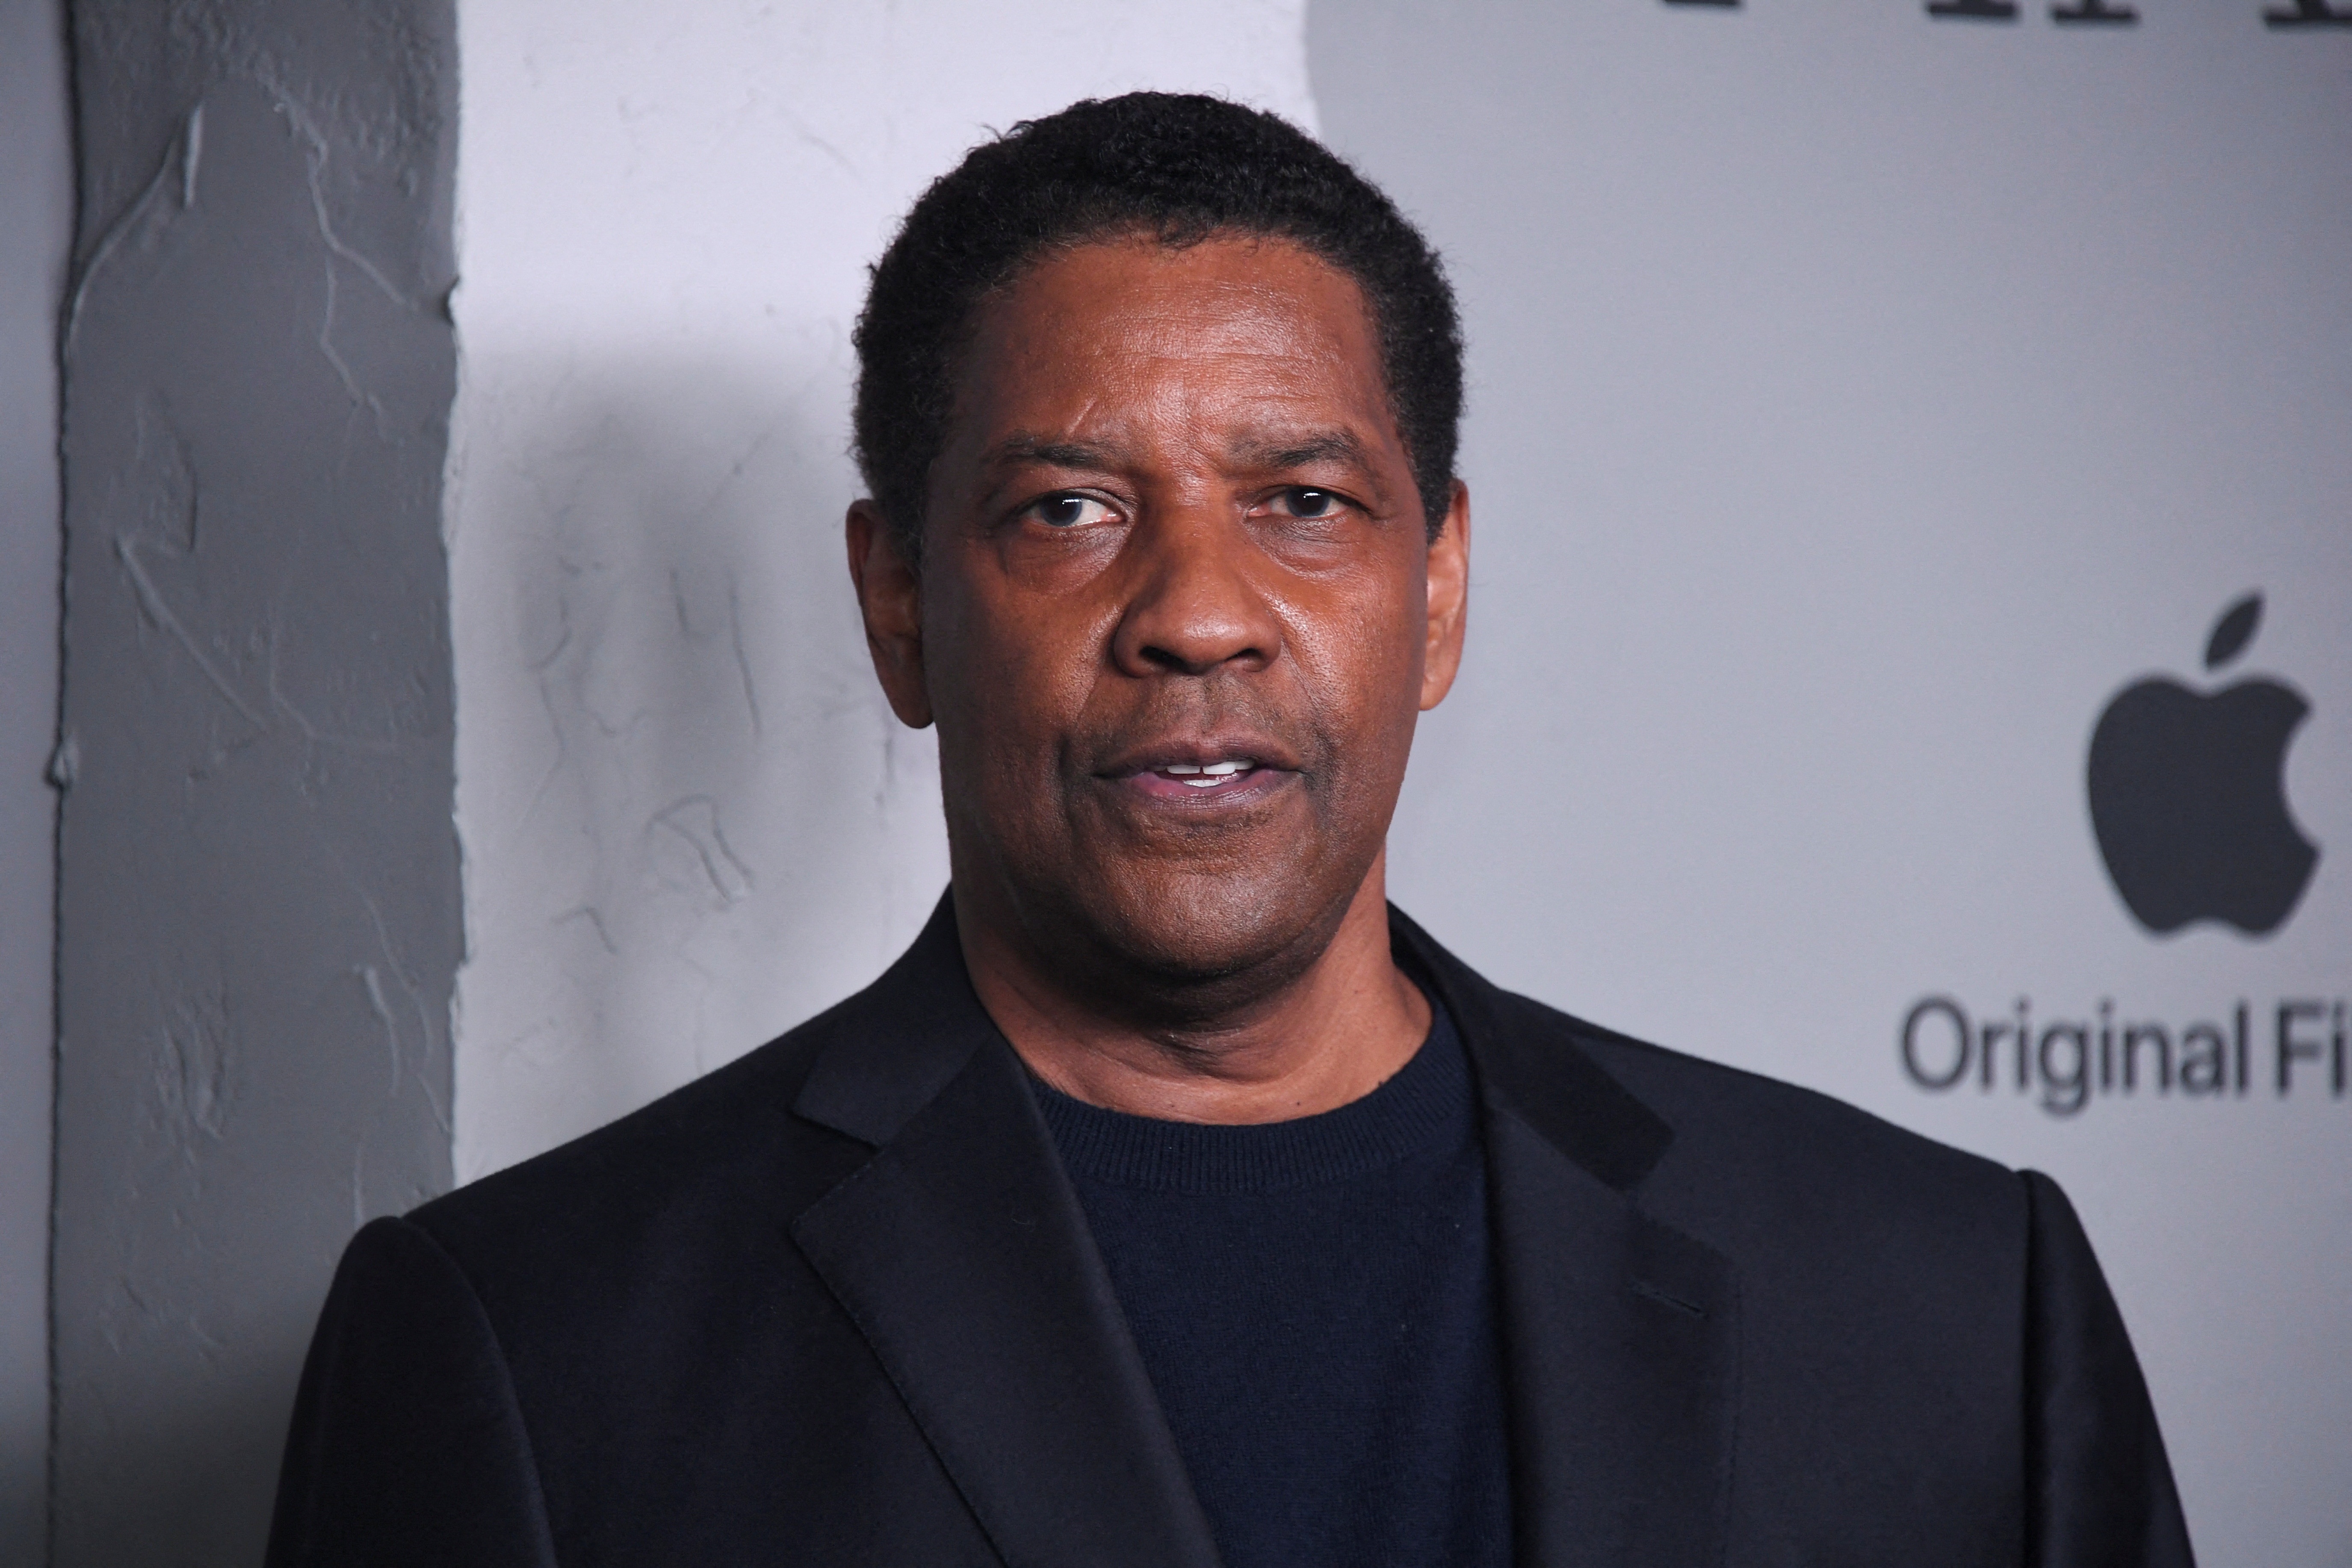 Cast member Denzel Washington attends the premiere for the film The Tragedy of Macbeth in Los Angeles, California, U.S., December 16, 2021. REUTERS/Phil McCarten